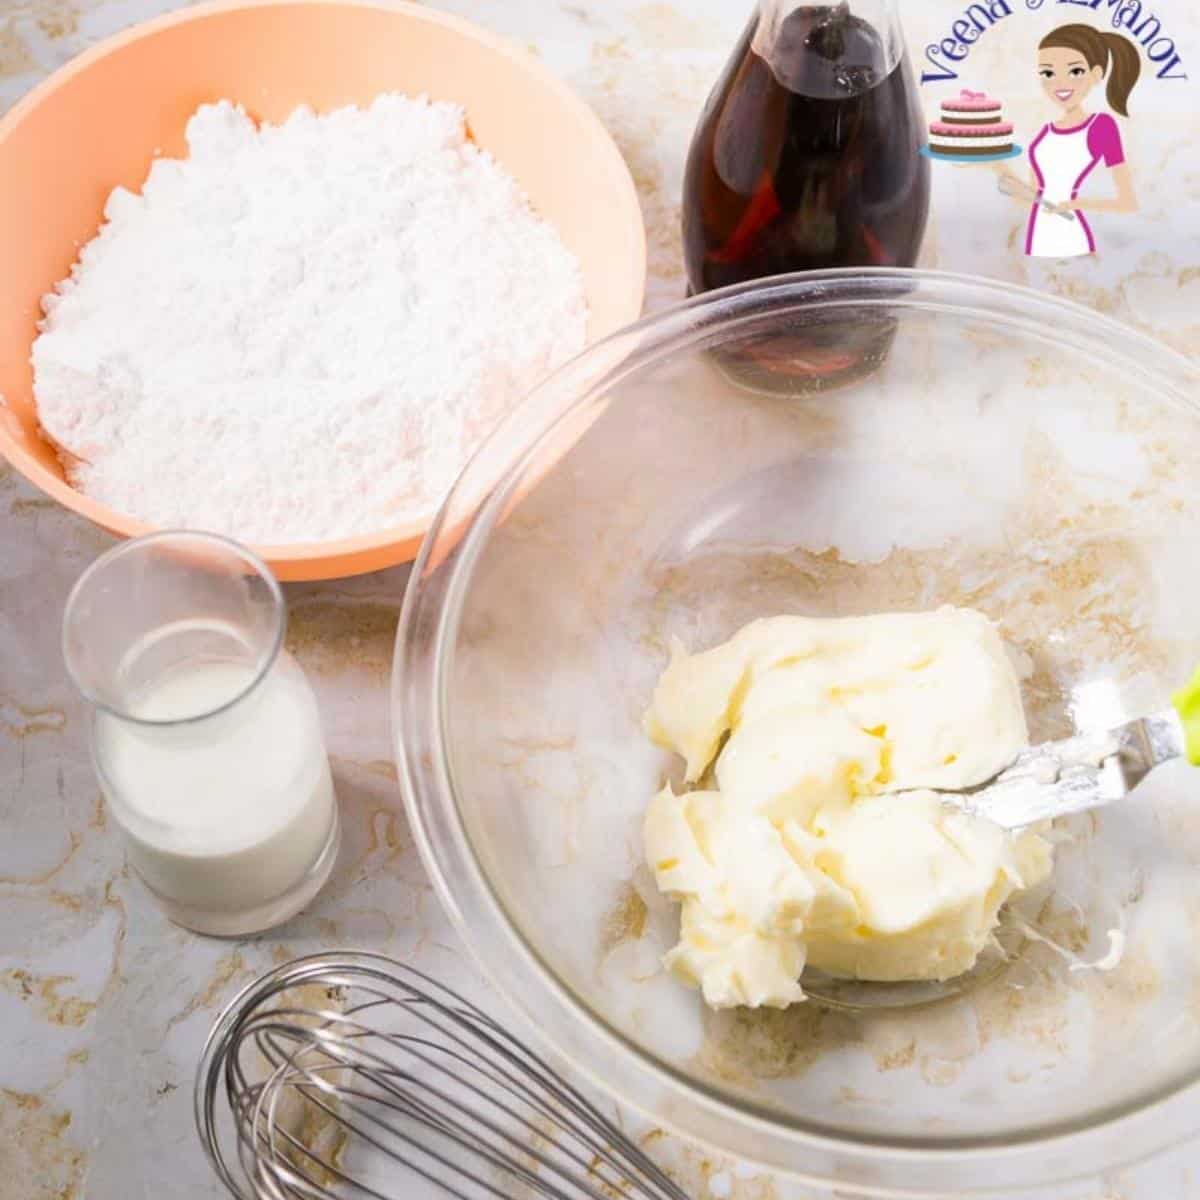 Buttercream ingredients in a bowl for vanilla cake.